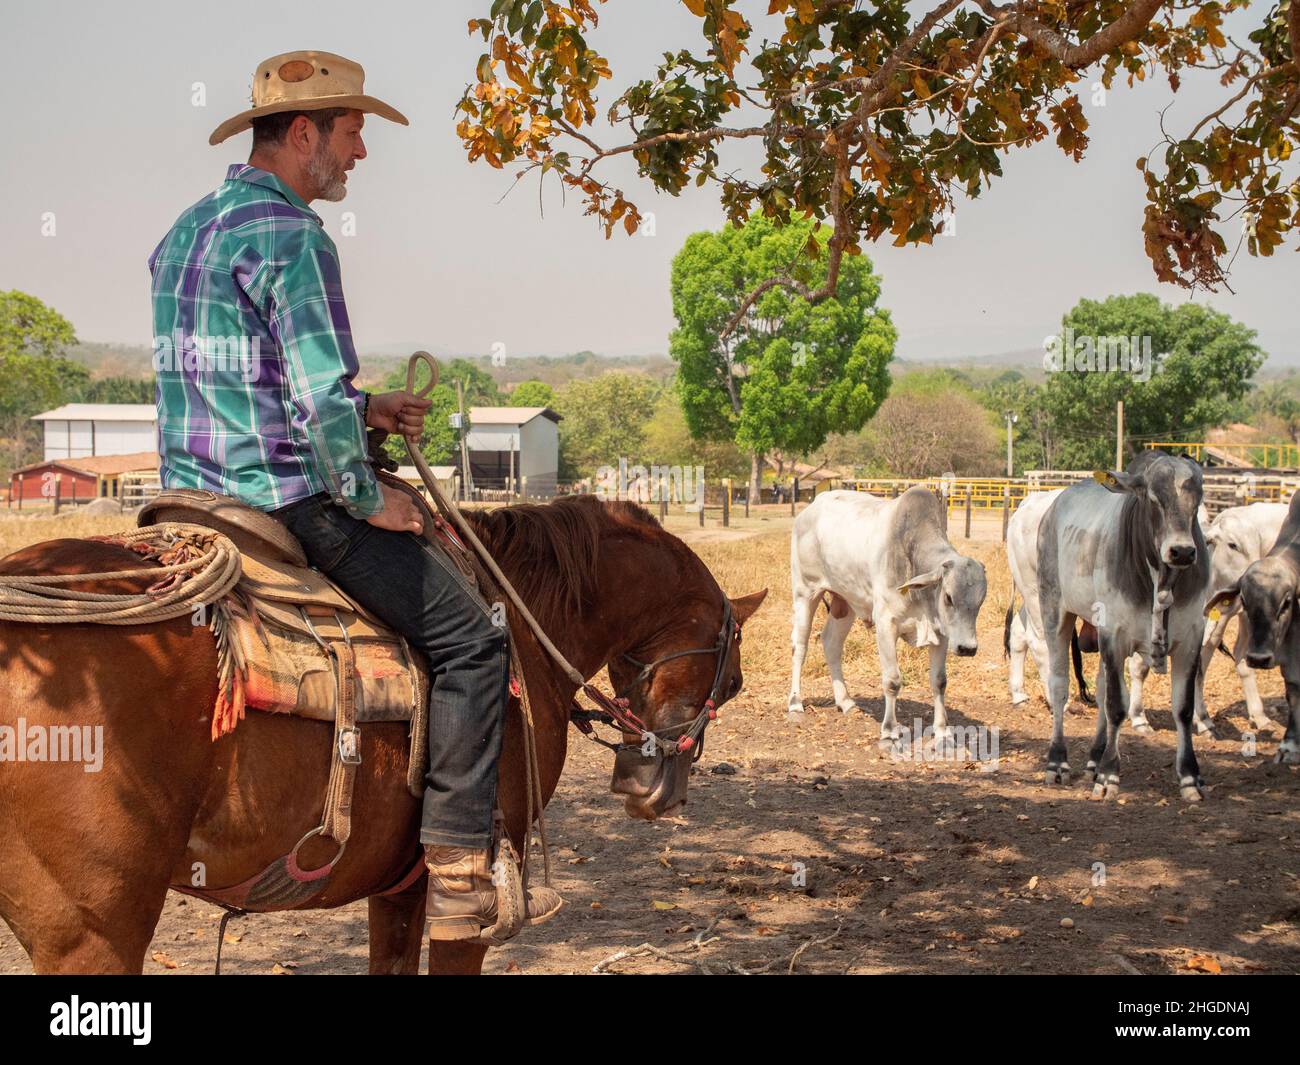 Cowboy is working from his horse on a cattle farm Stock Photo